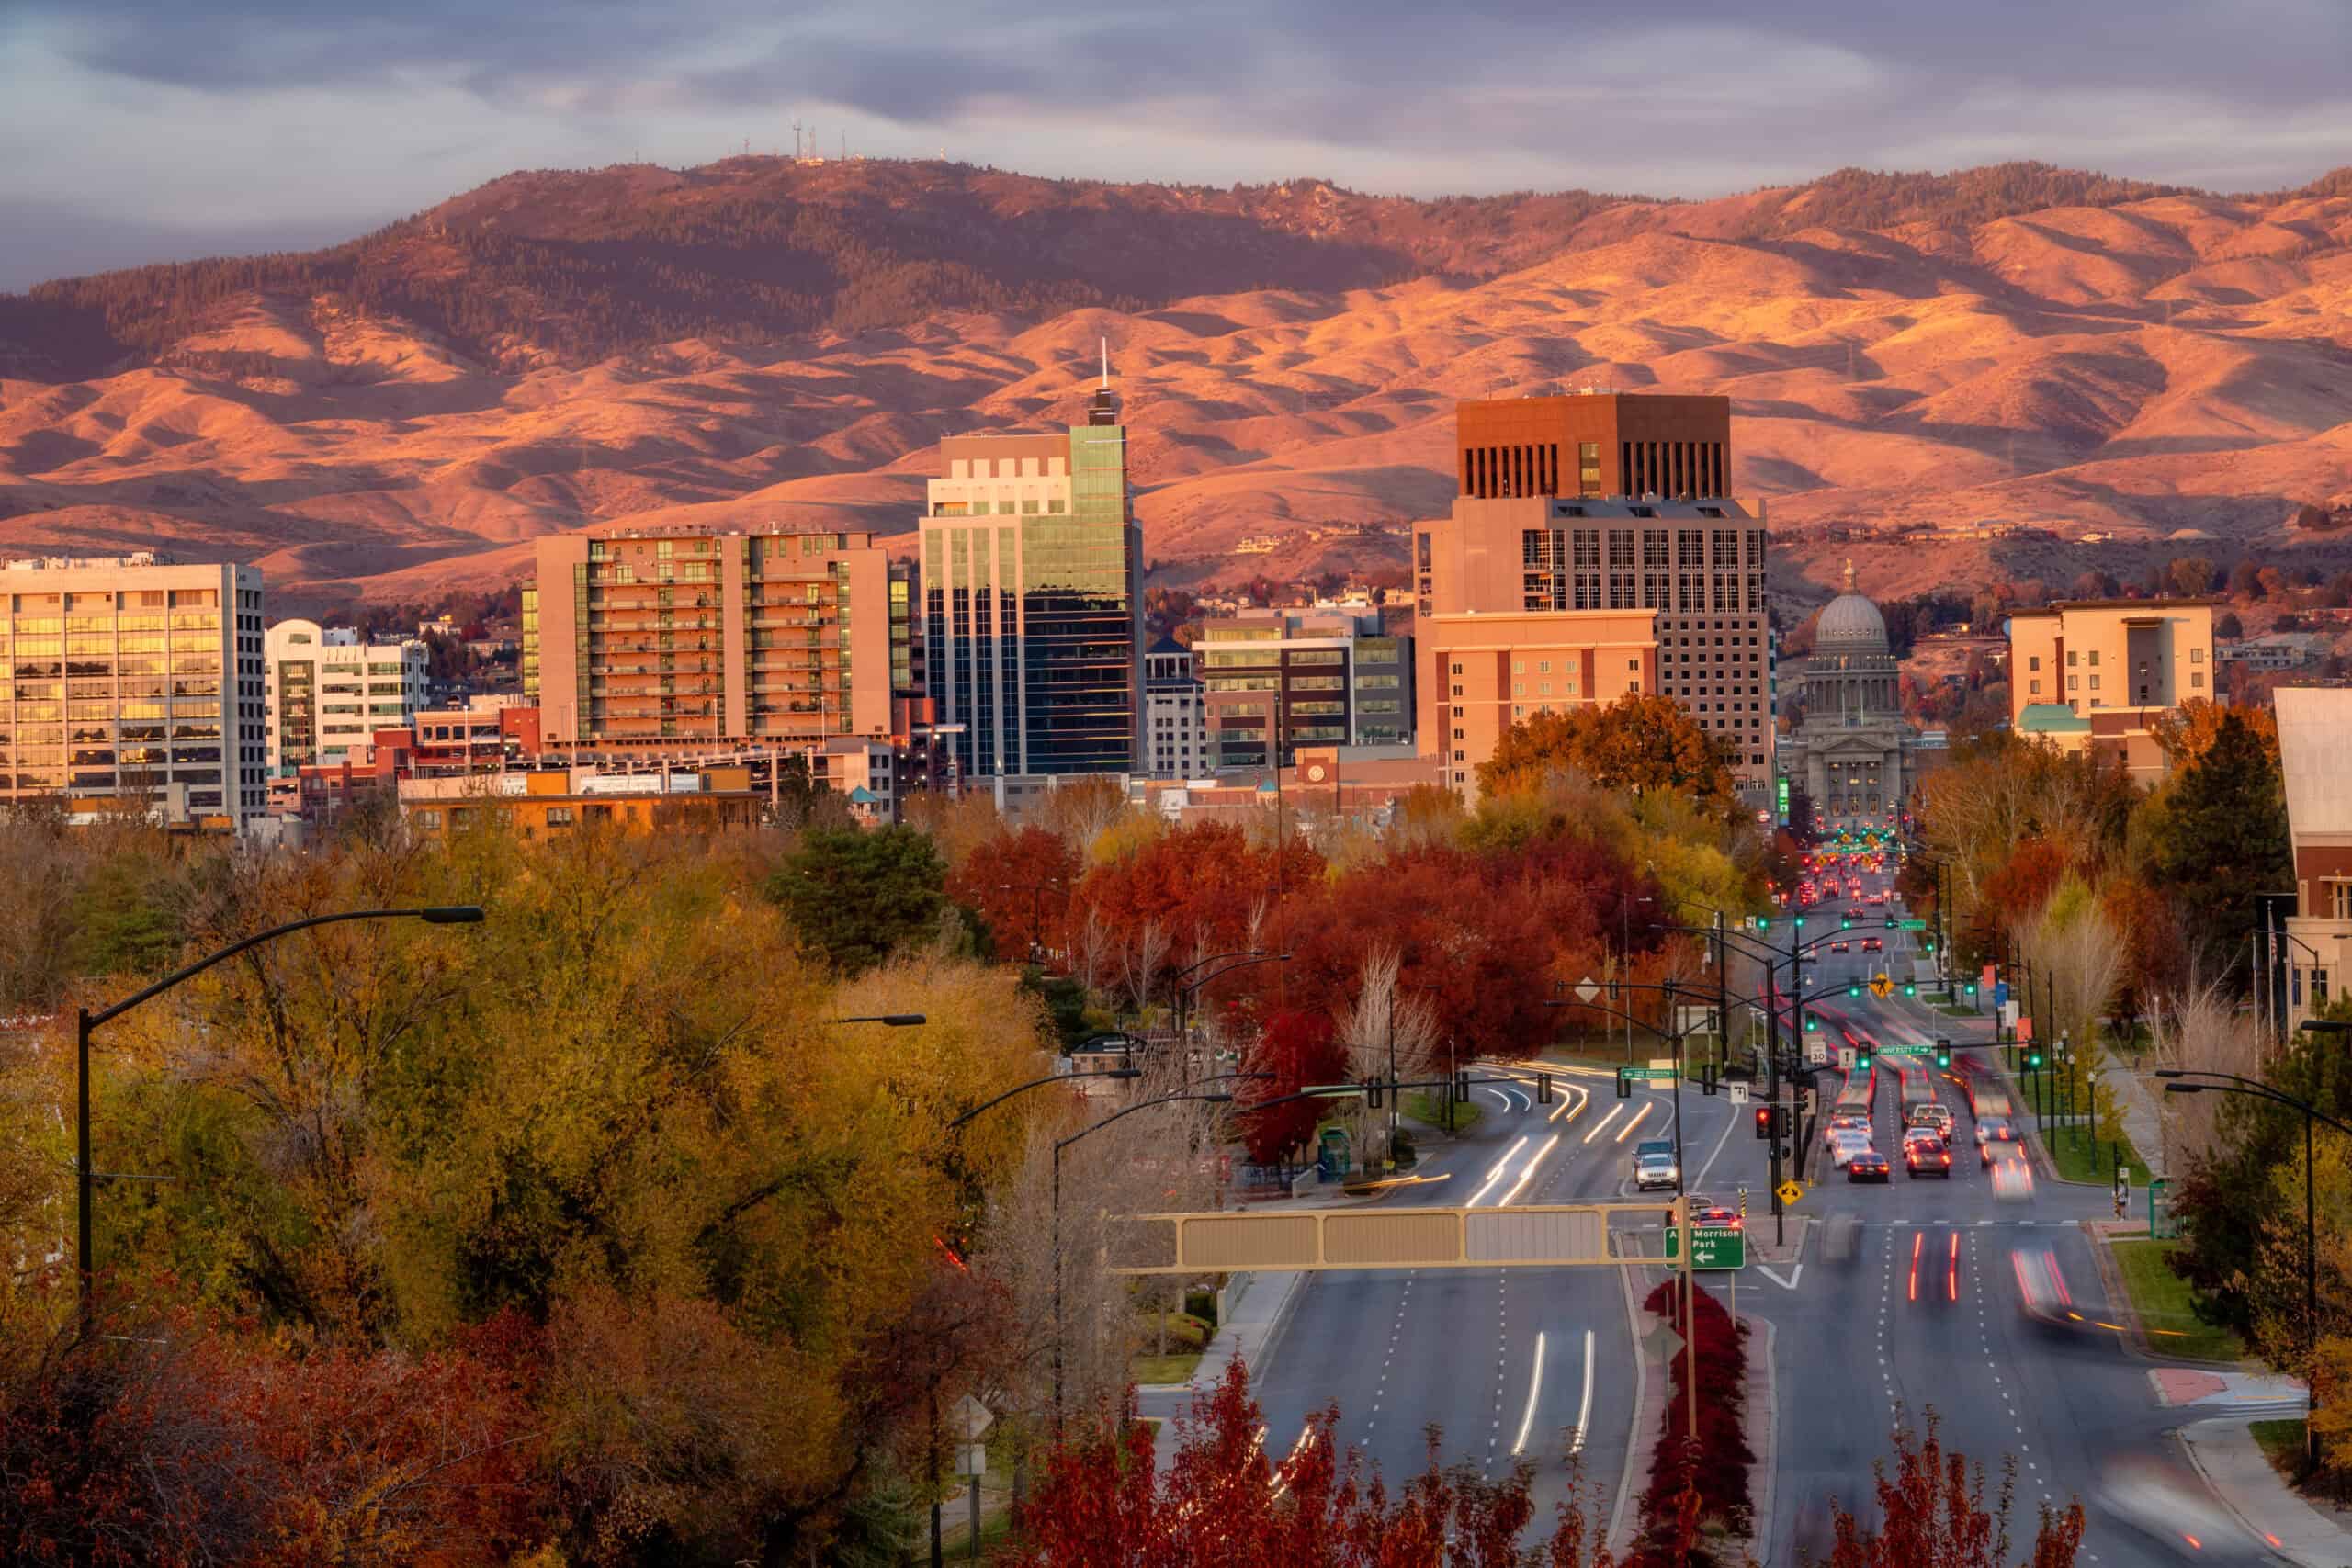 <p>Boise, Idaho, the state capital, is a dynamic city that beautifully combines natural landscapes with a thriving cultural scene. Nestled along the Boise River and at the foot of the Rocky Mountains, the city offers an array of outdoor activities, from the scenic Boise River Greenbelt to the ski slopes of Bogus Basin. </p> <p>Boise’s vibrant downtown features a mix of historic and modern architecture, lively shops, and impressive cultural spots like the Basque Block. With its flourishing food scene, notable museums, and a strong sense of community, Boise stands out as an underrated gem worth exploring.</p>